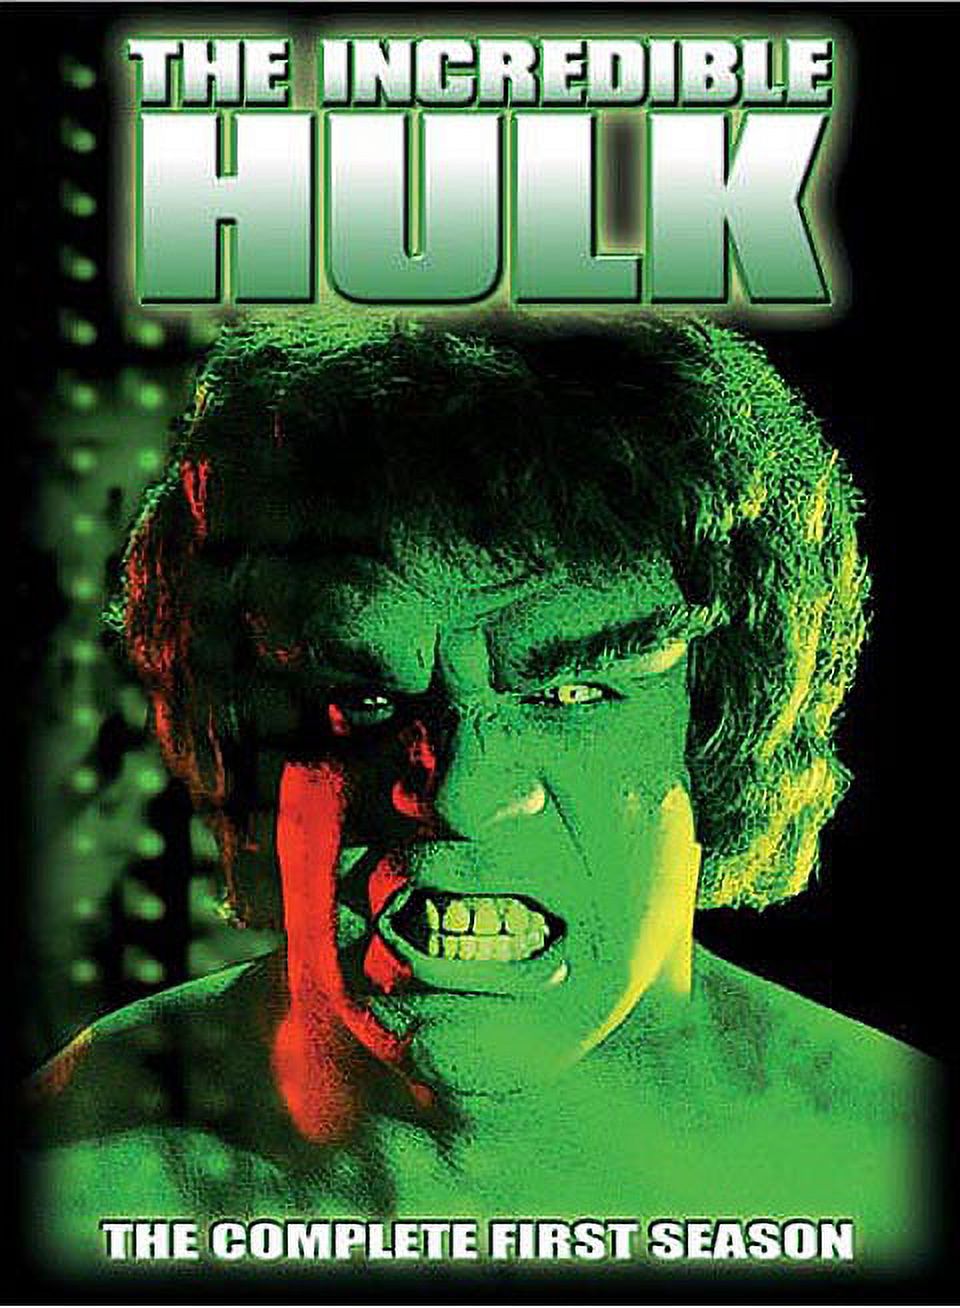 Incredible Hulk: The Complete First Season (DVD) - image 2 of 2